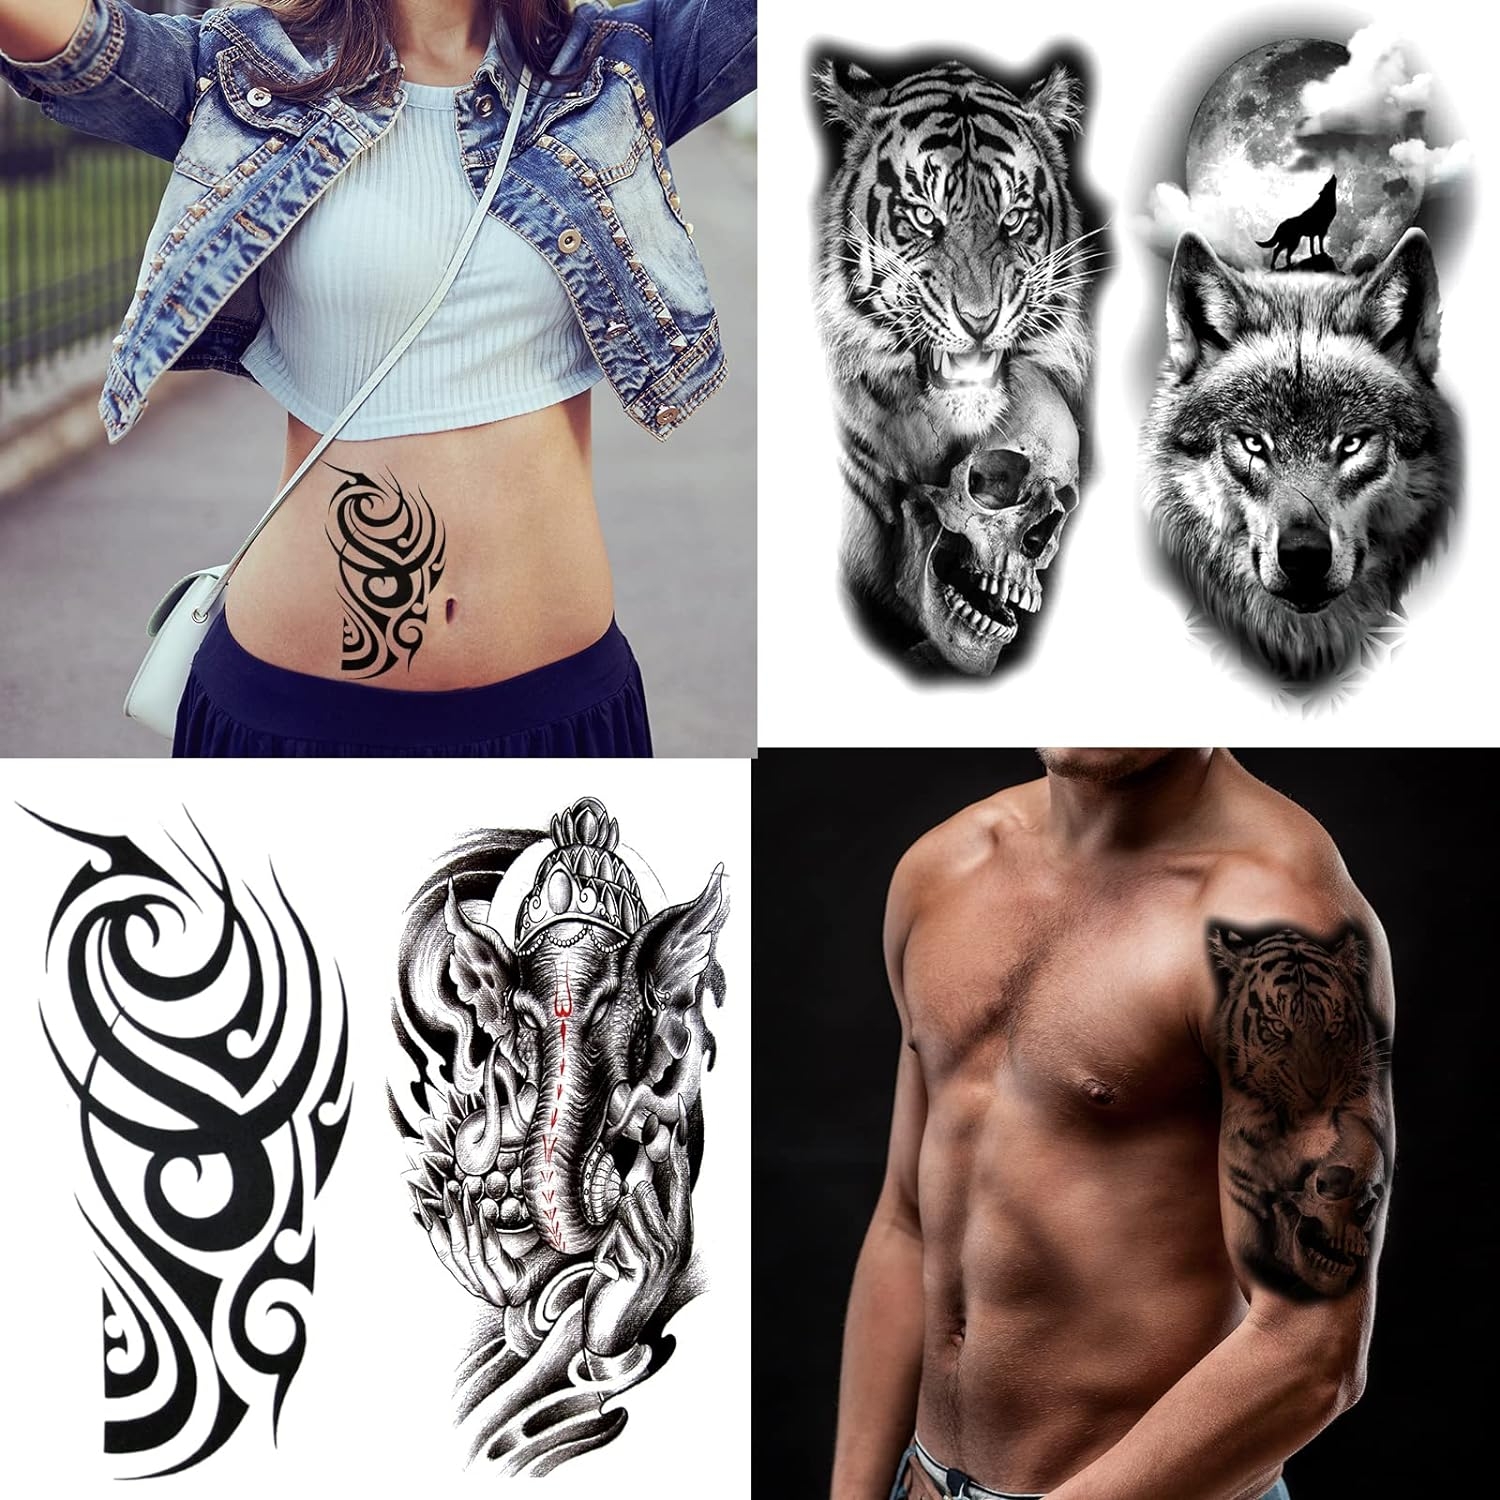 62 Sheets Temporary Tattoos Stickers, Fake Body Arm Chest Shoulder Tattoos for Men and Women, Halloween Temporary Tattoos Black Fake Skull Skeleton Tattoos for Halloween Cosplay